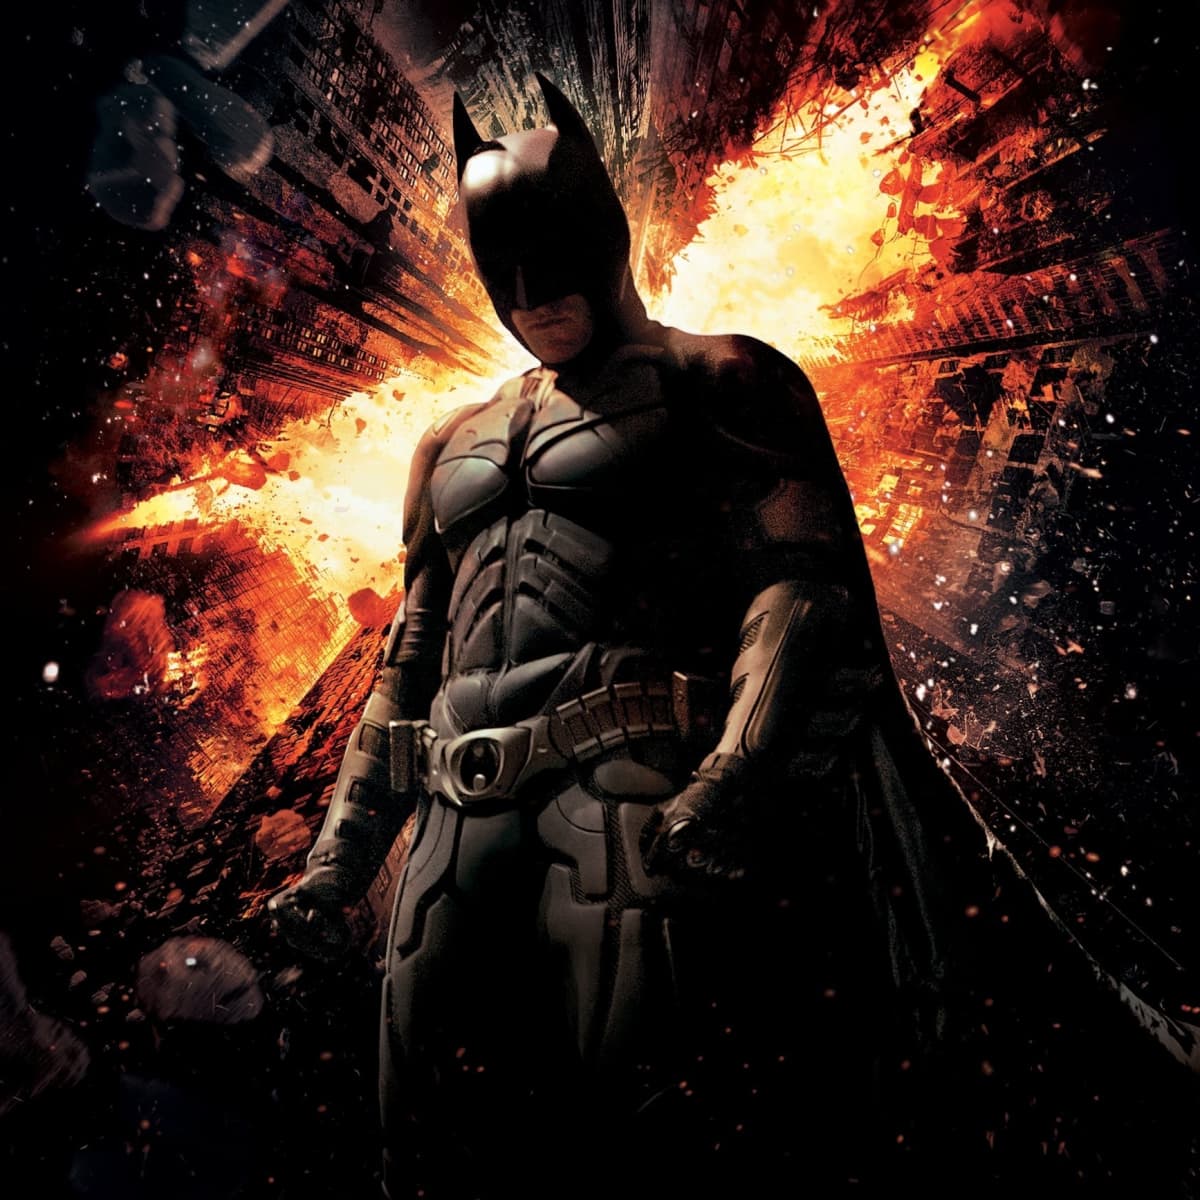 10 Reasons Why The Dark Knight Trilogy was so Successful - HubPages